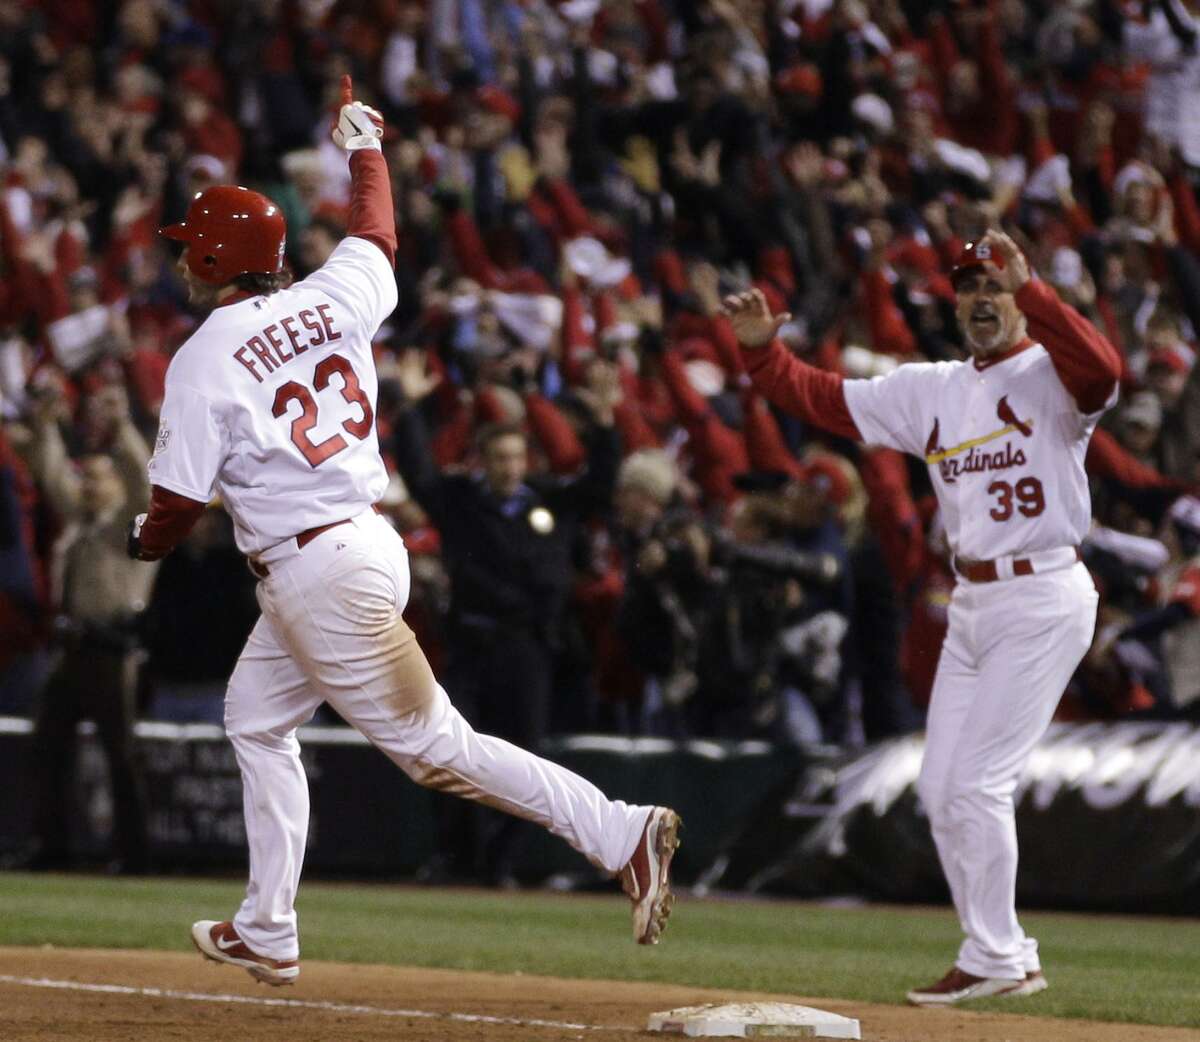 Freese HR wins 11-inning thriller for Cardinals 10-9 over Rangers